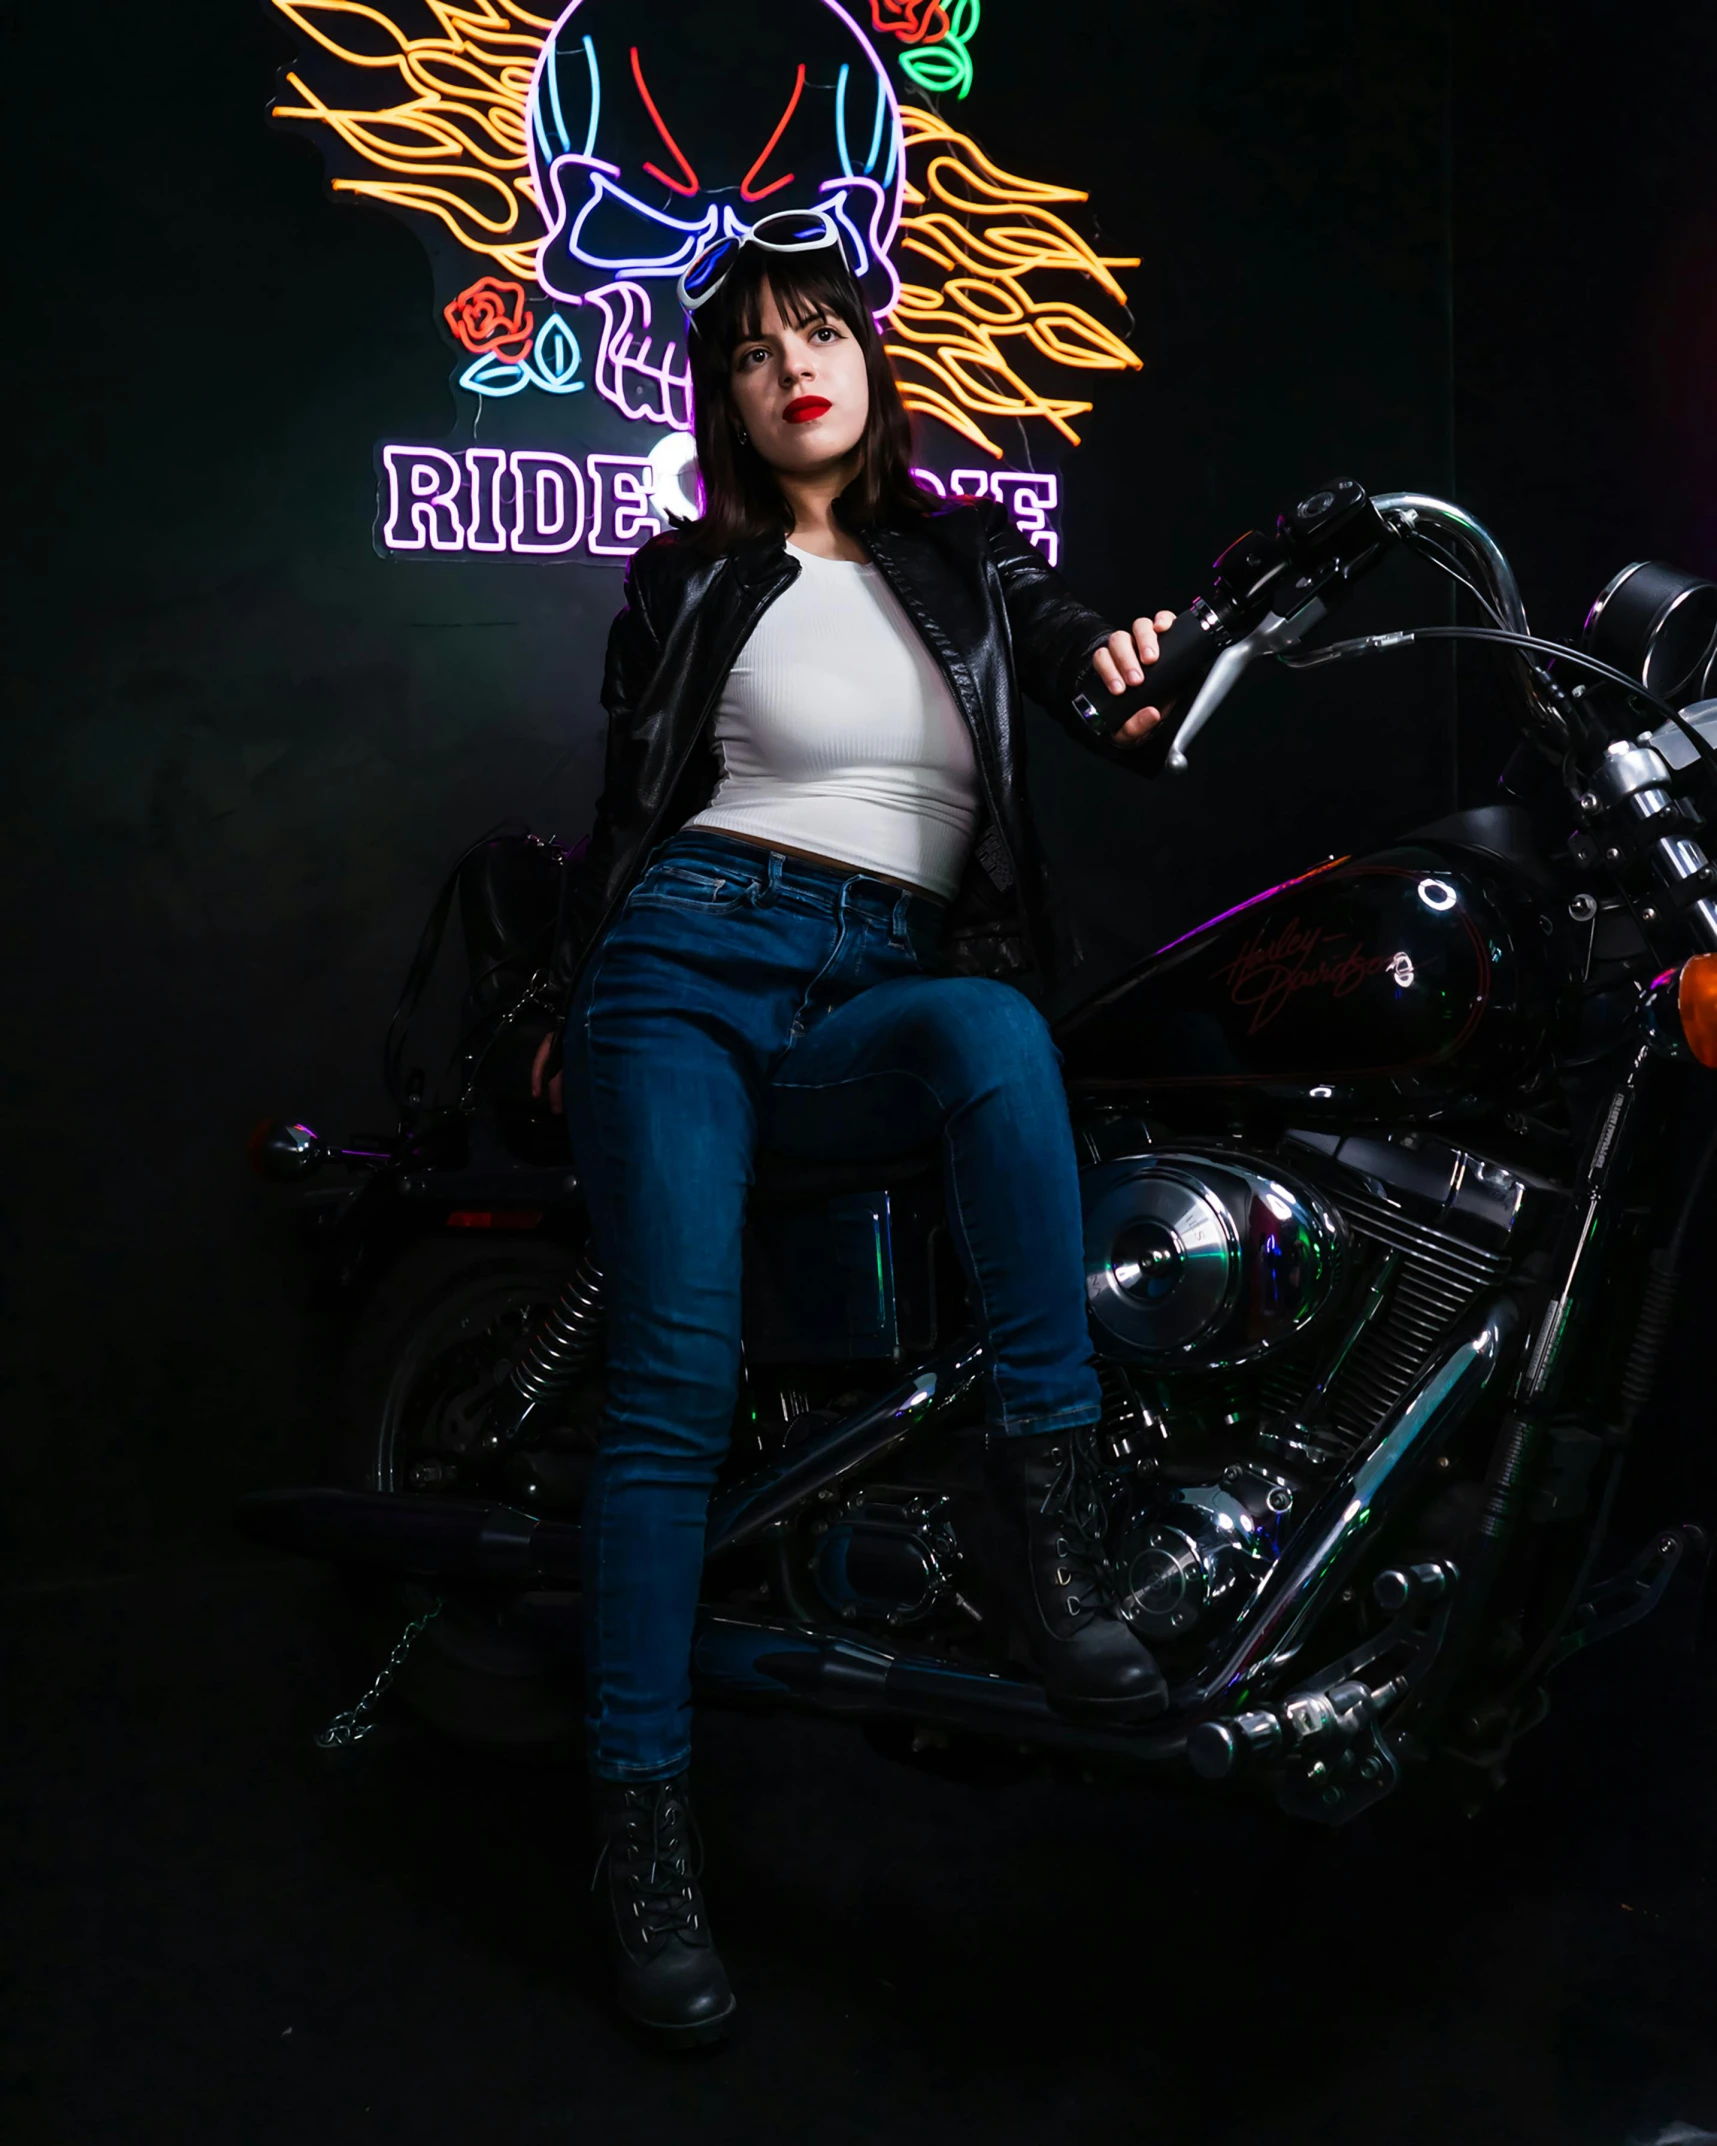 a woman sits on top of a motorcycle in front of a neon sign